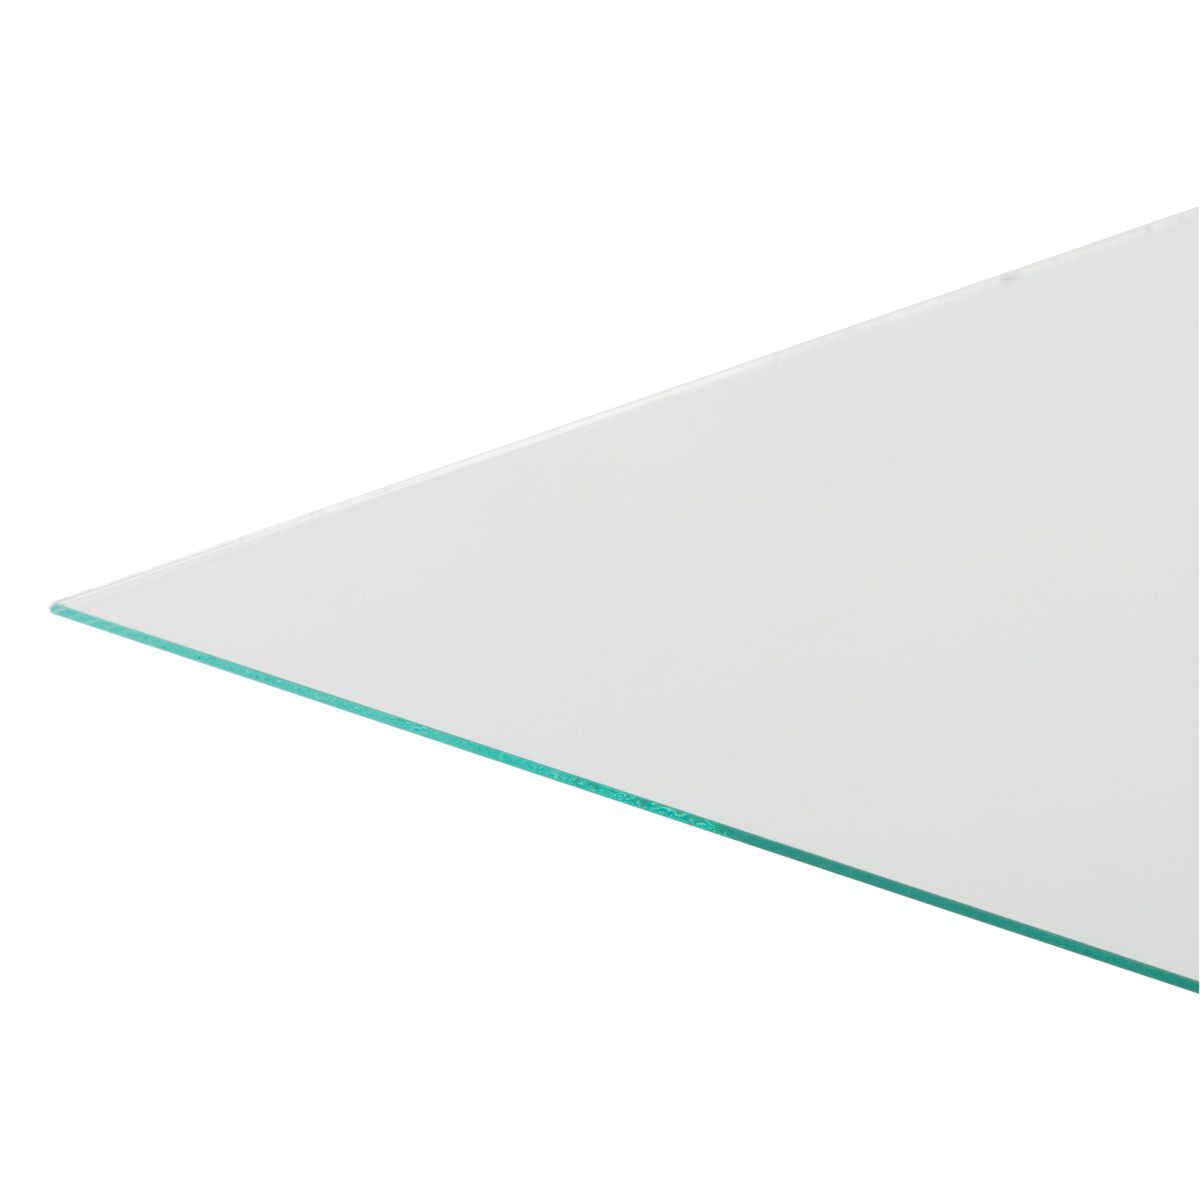 2mm thick glass with rounded edge for safety